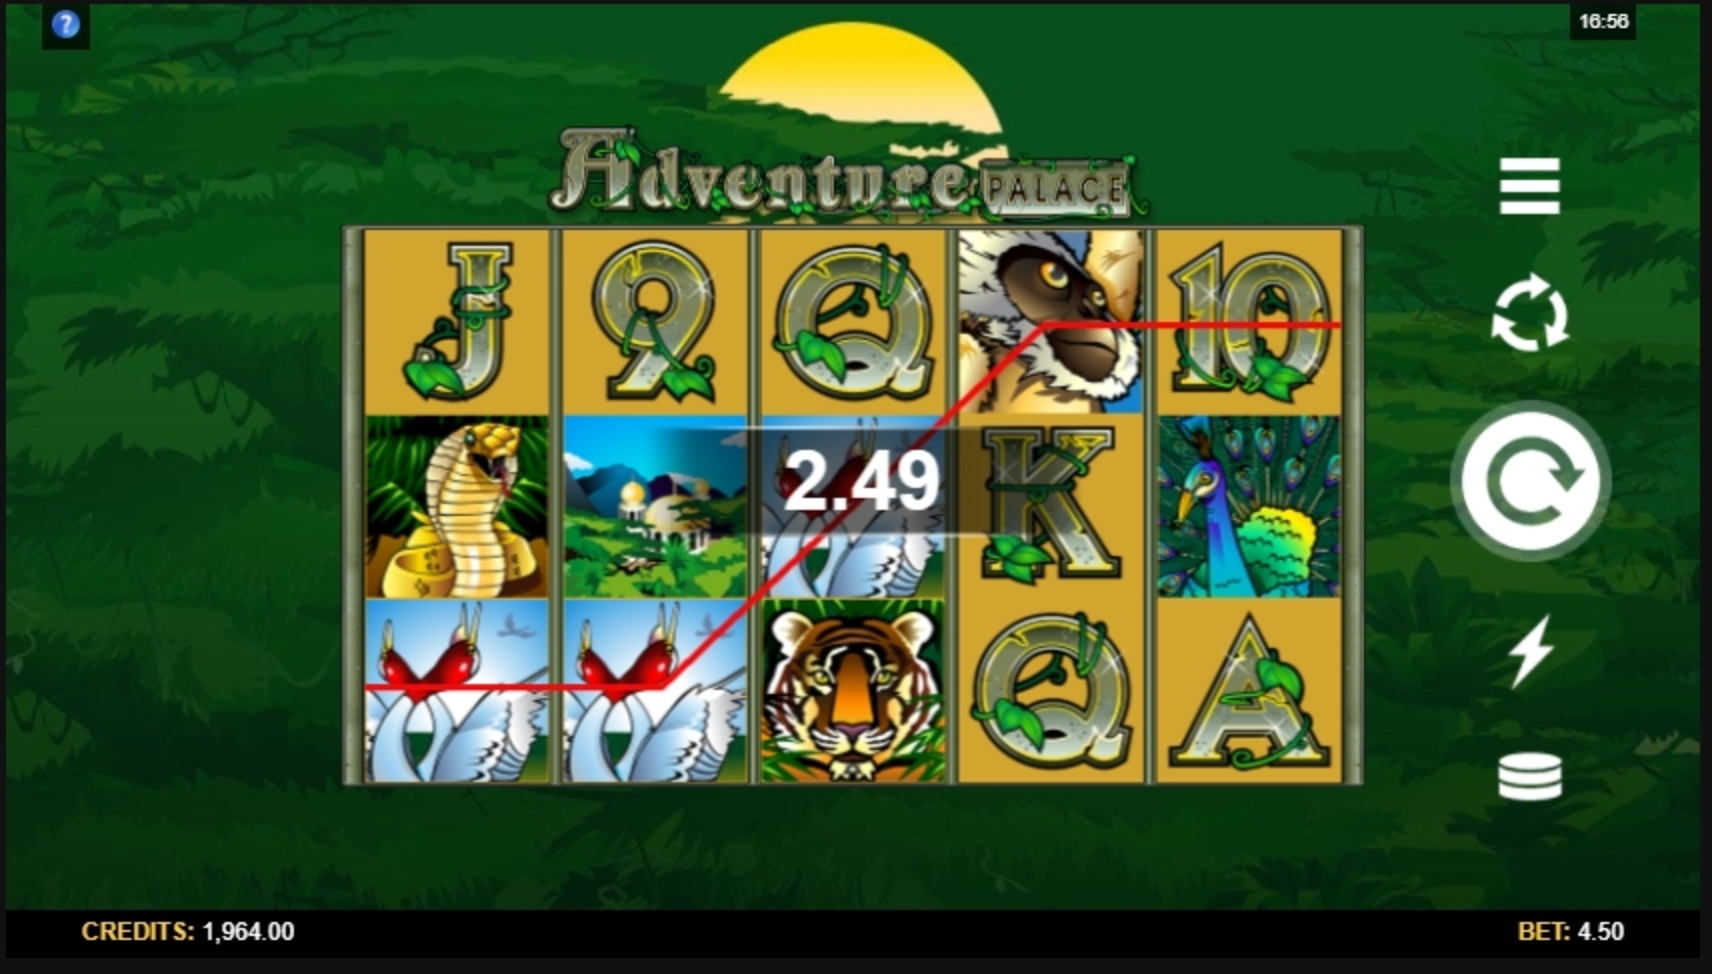 Win Money in Adventure Palace Free Slot Game by Microgaming